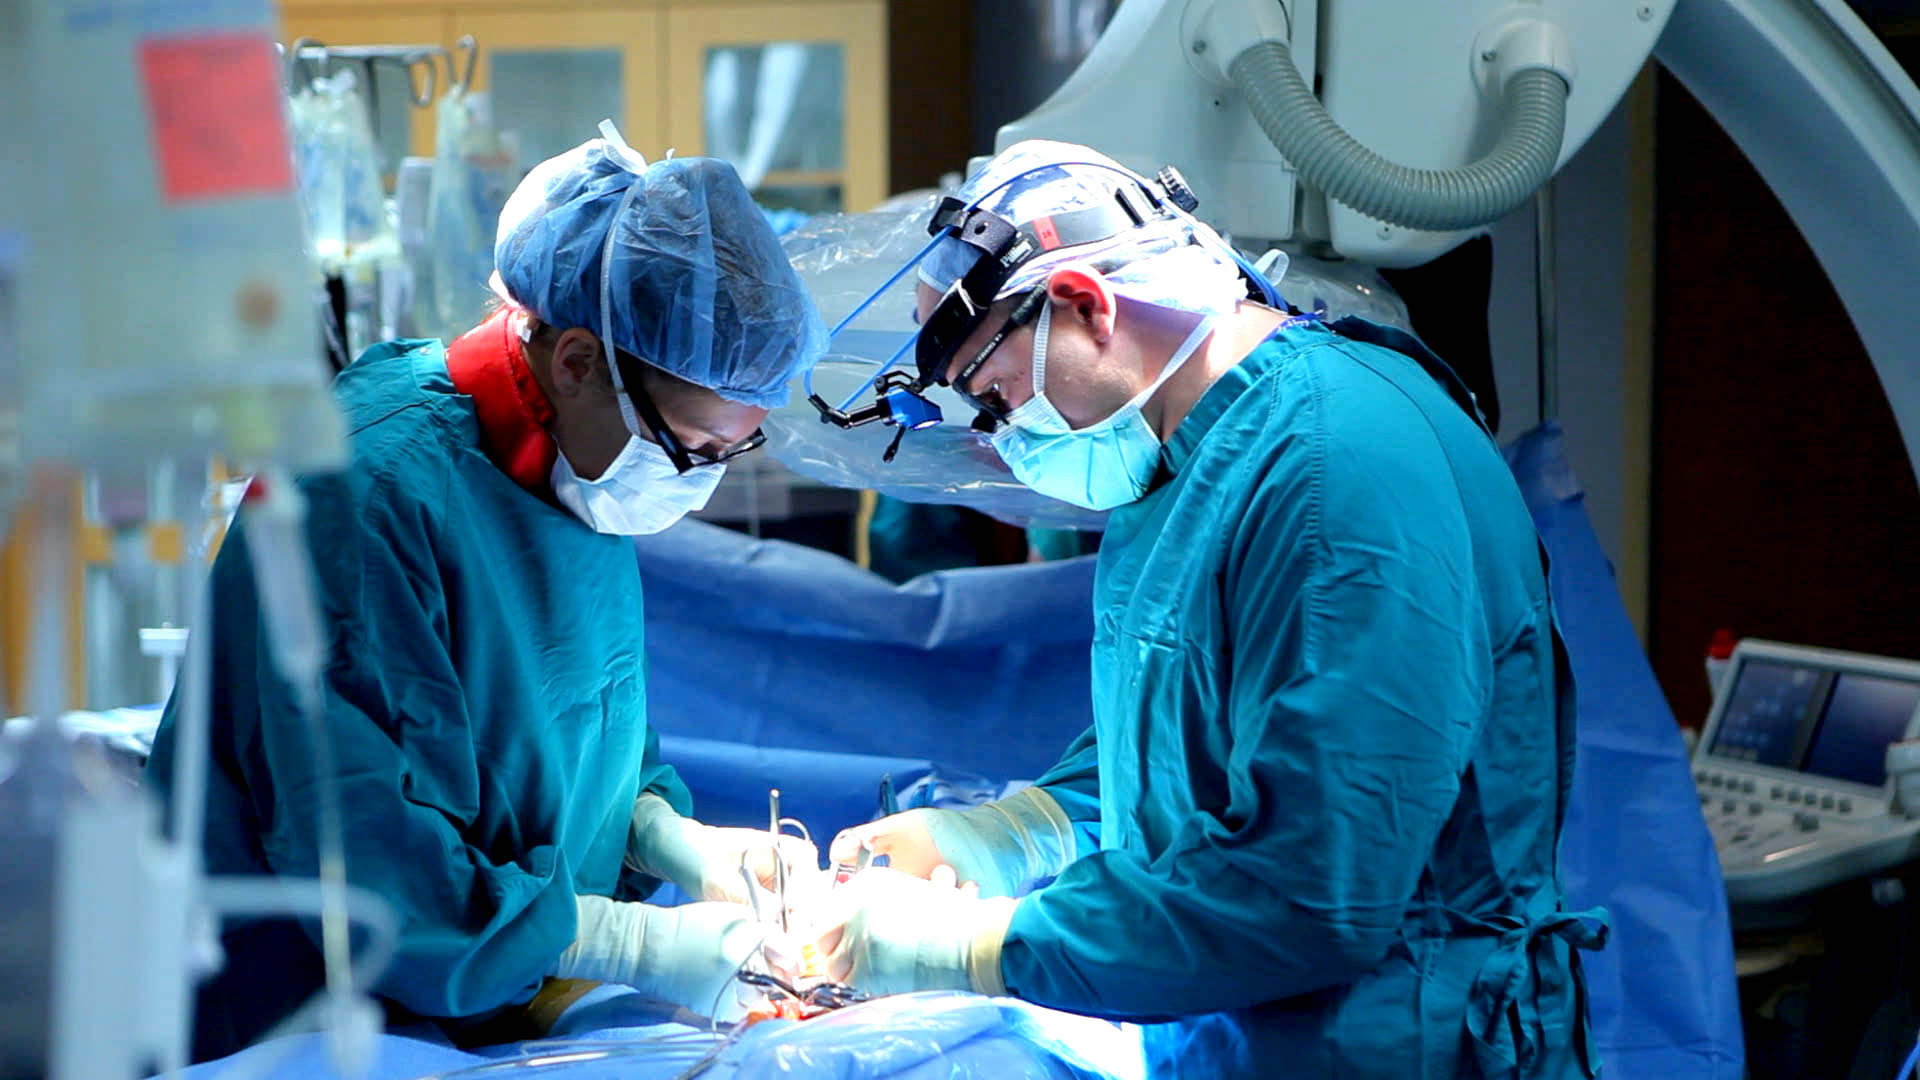 Woman Is Badly Burned After Farting During Surgery